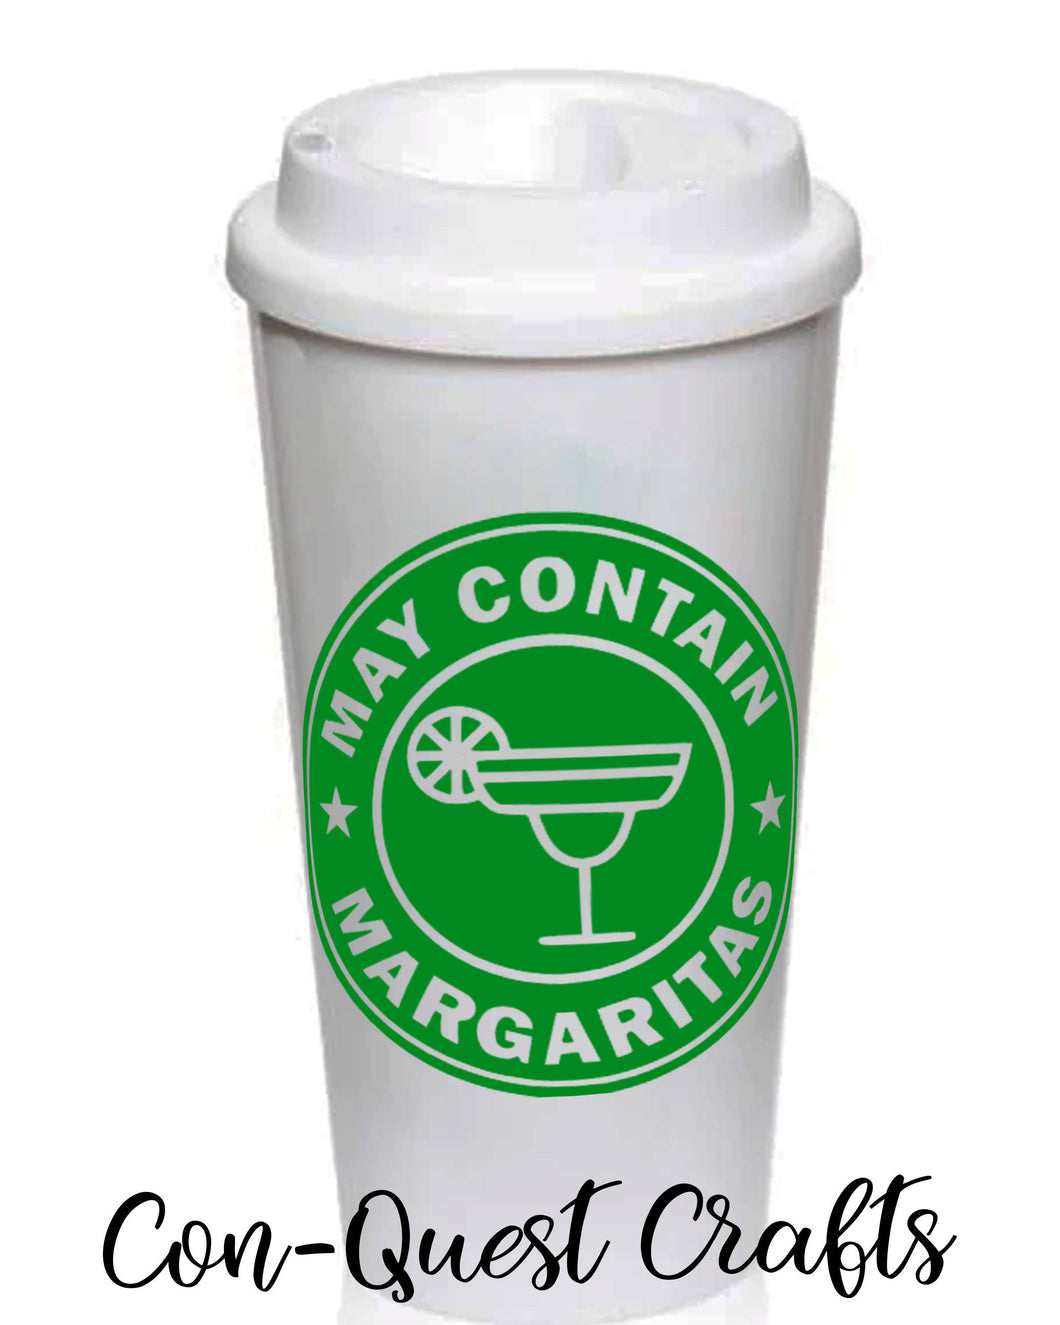 May Contain Margaritas Permanent Decal - DECAL ONLY